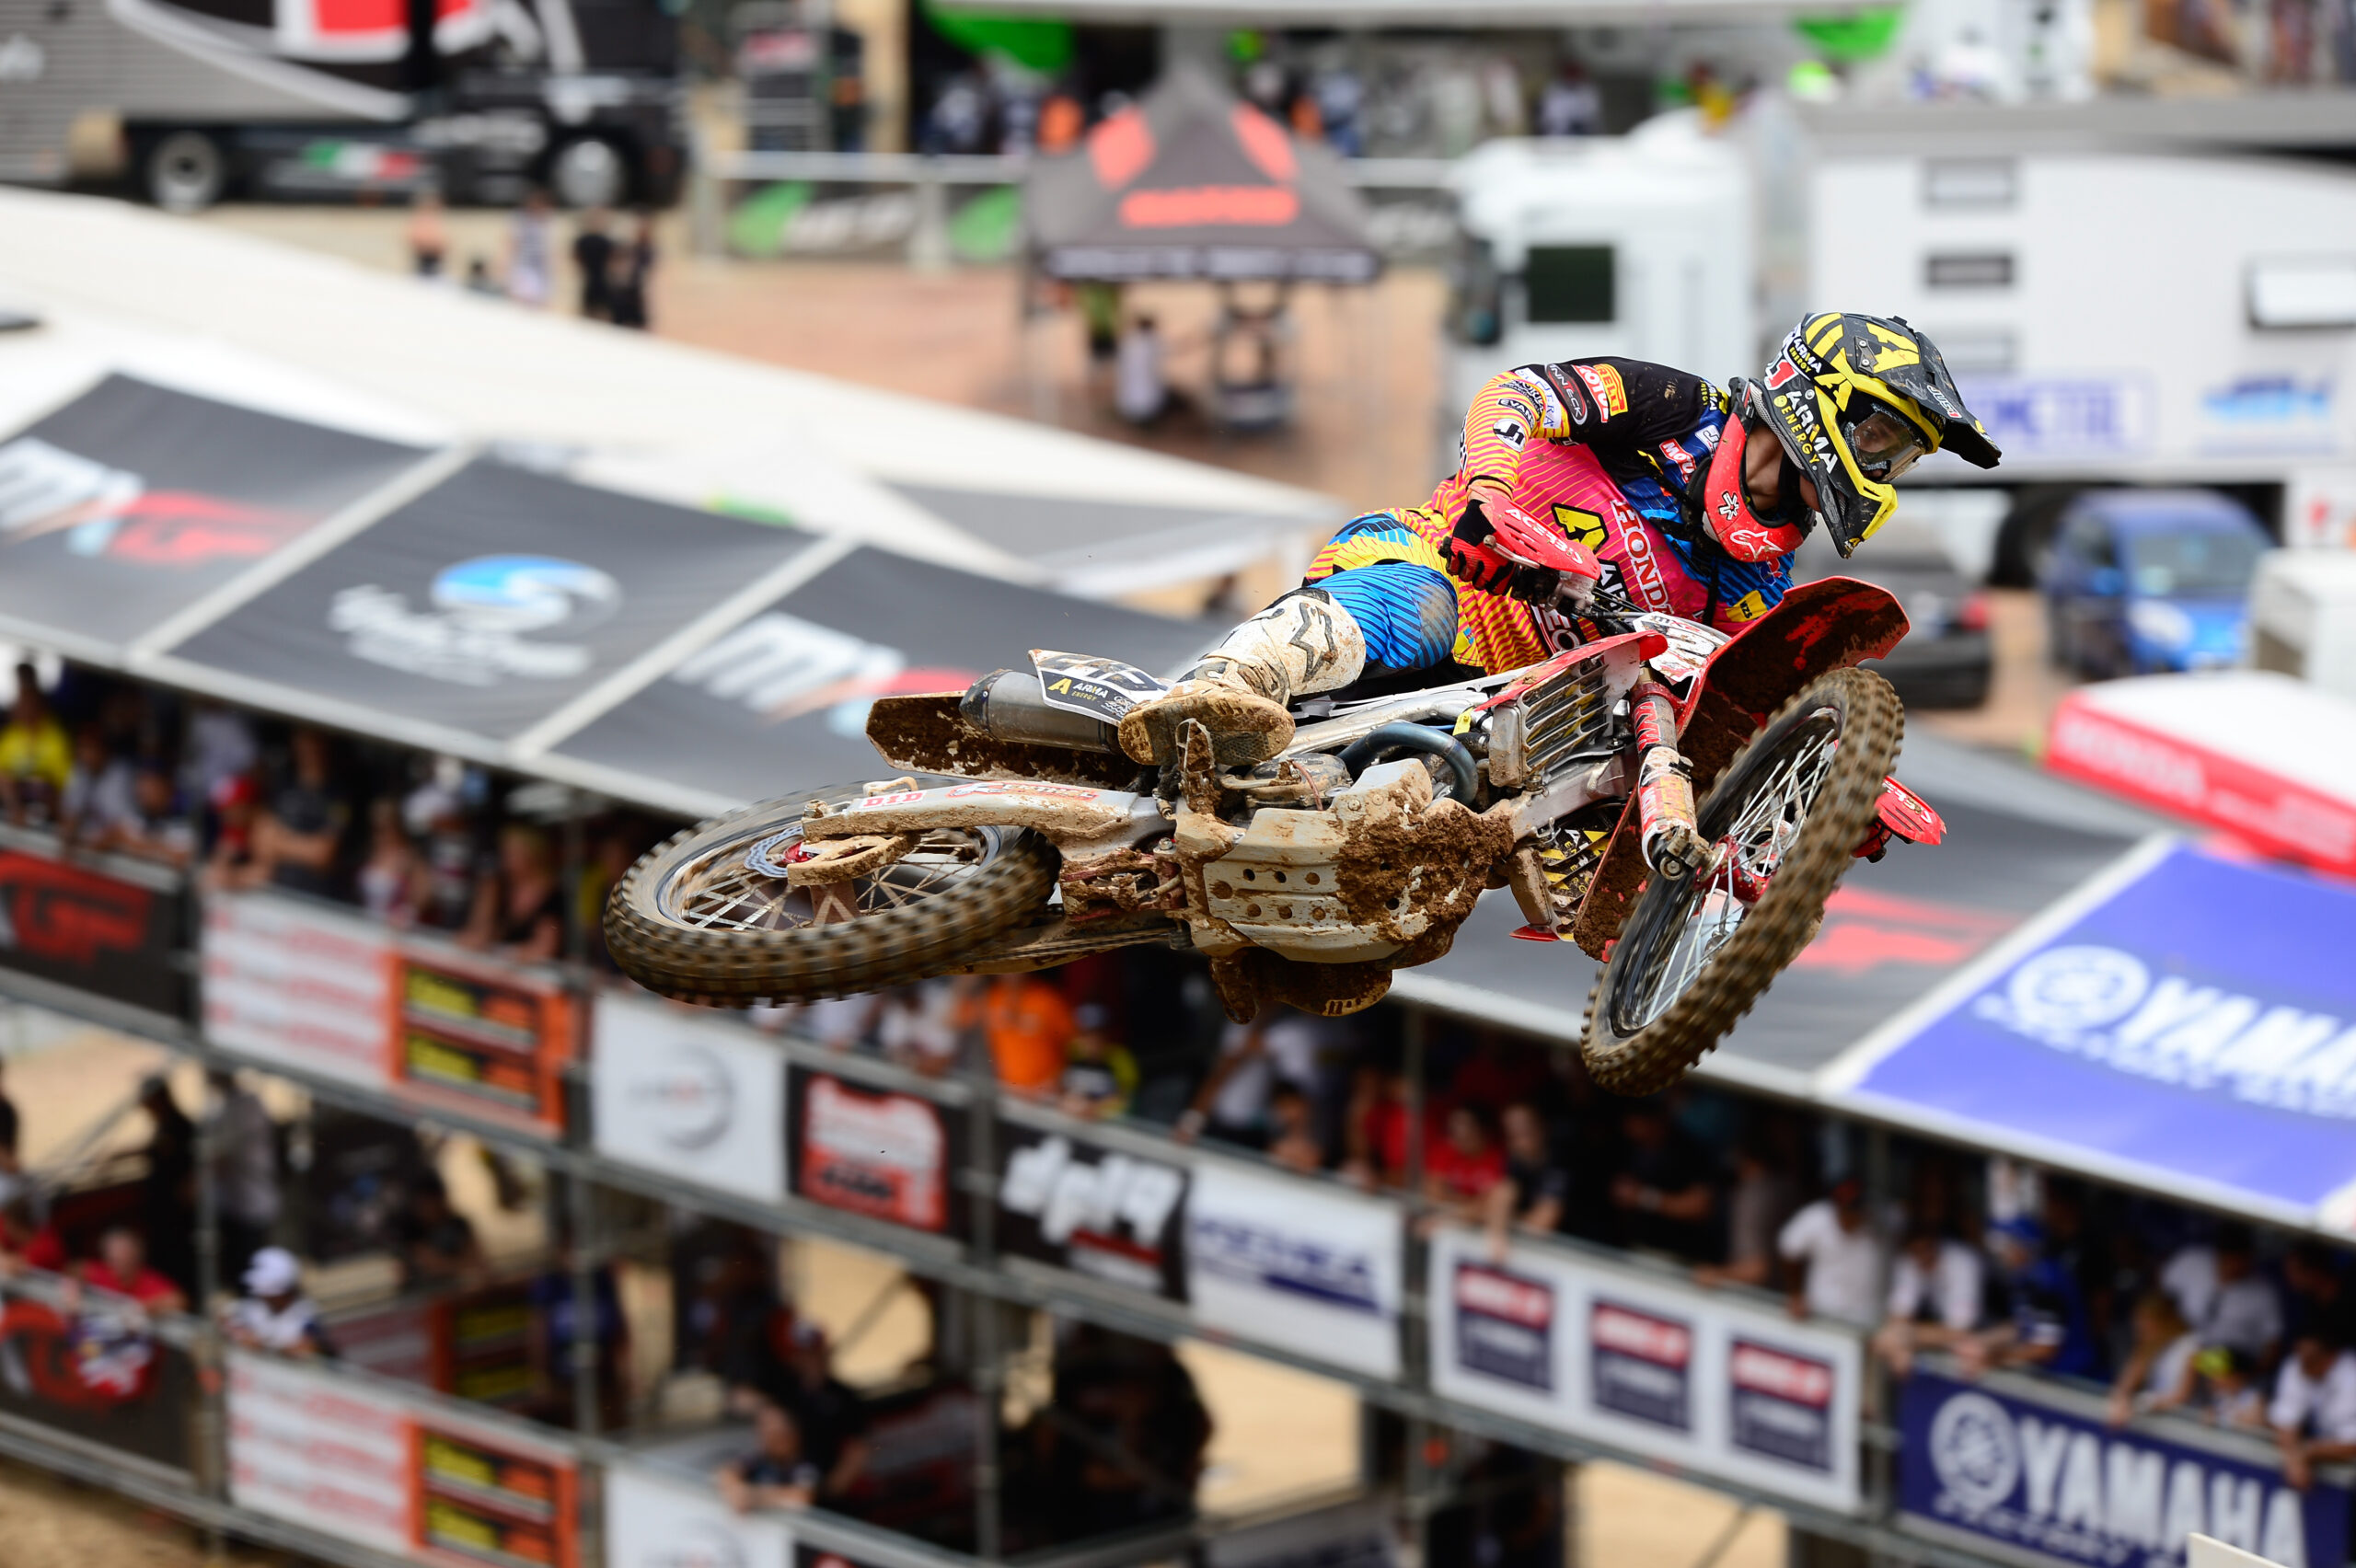 HSL in the MXGP of Italy